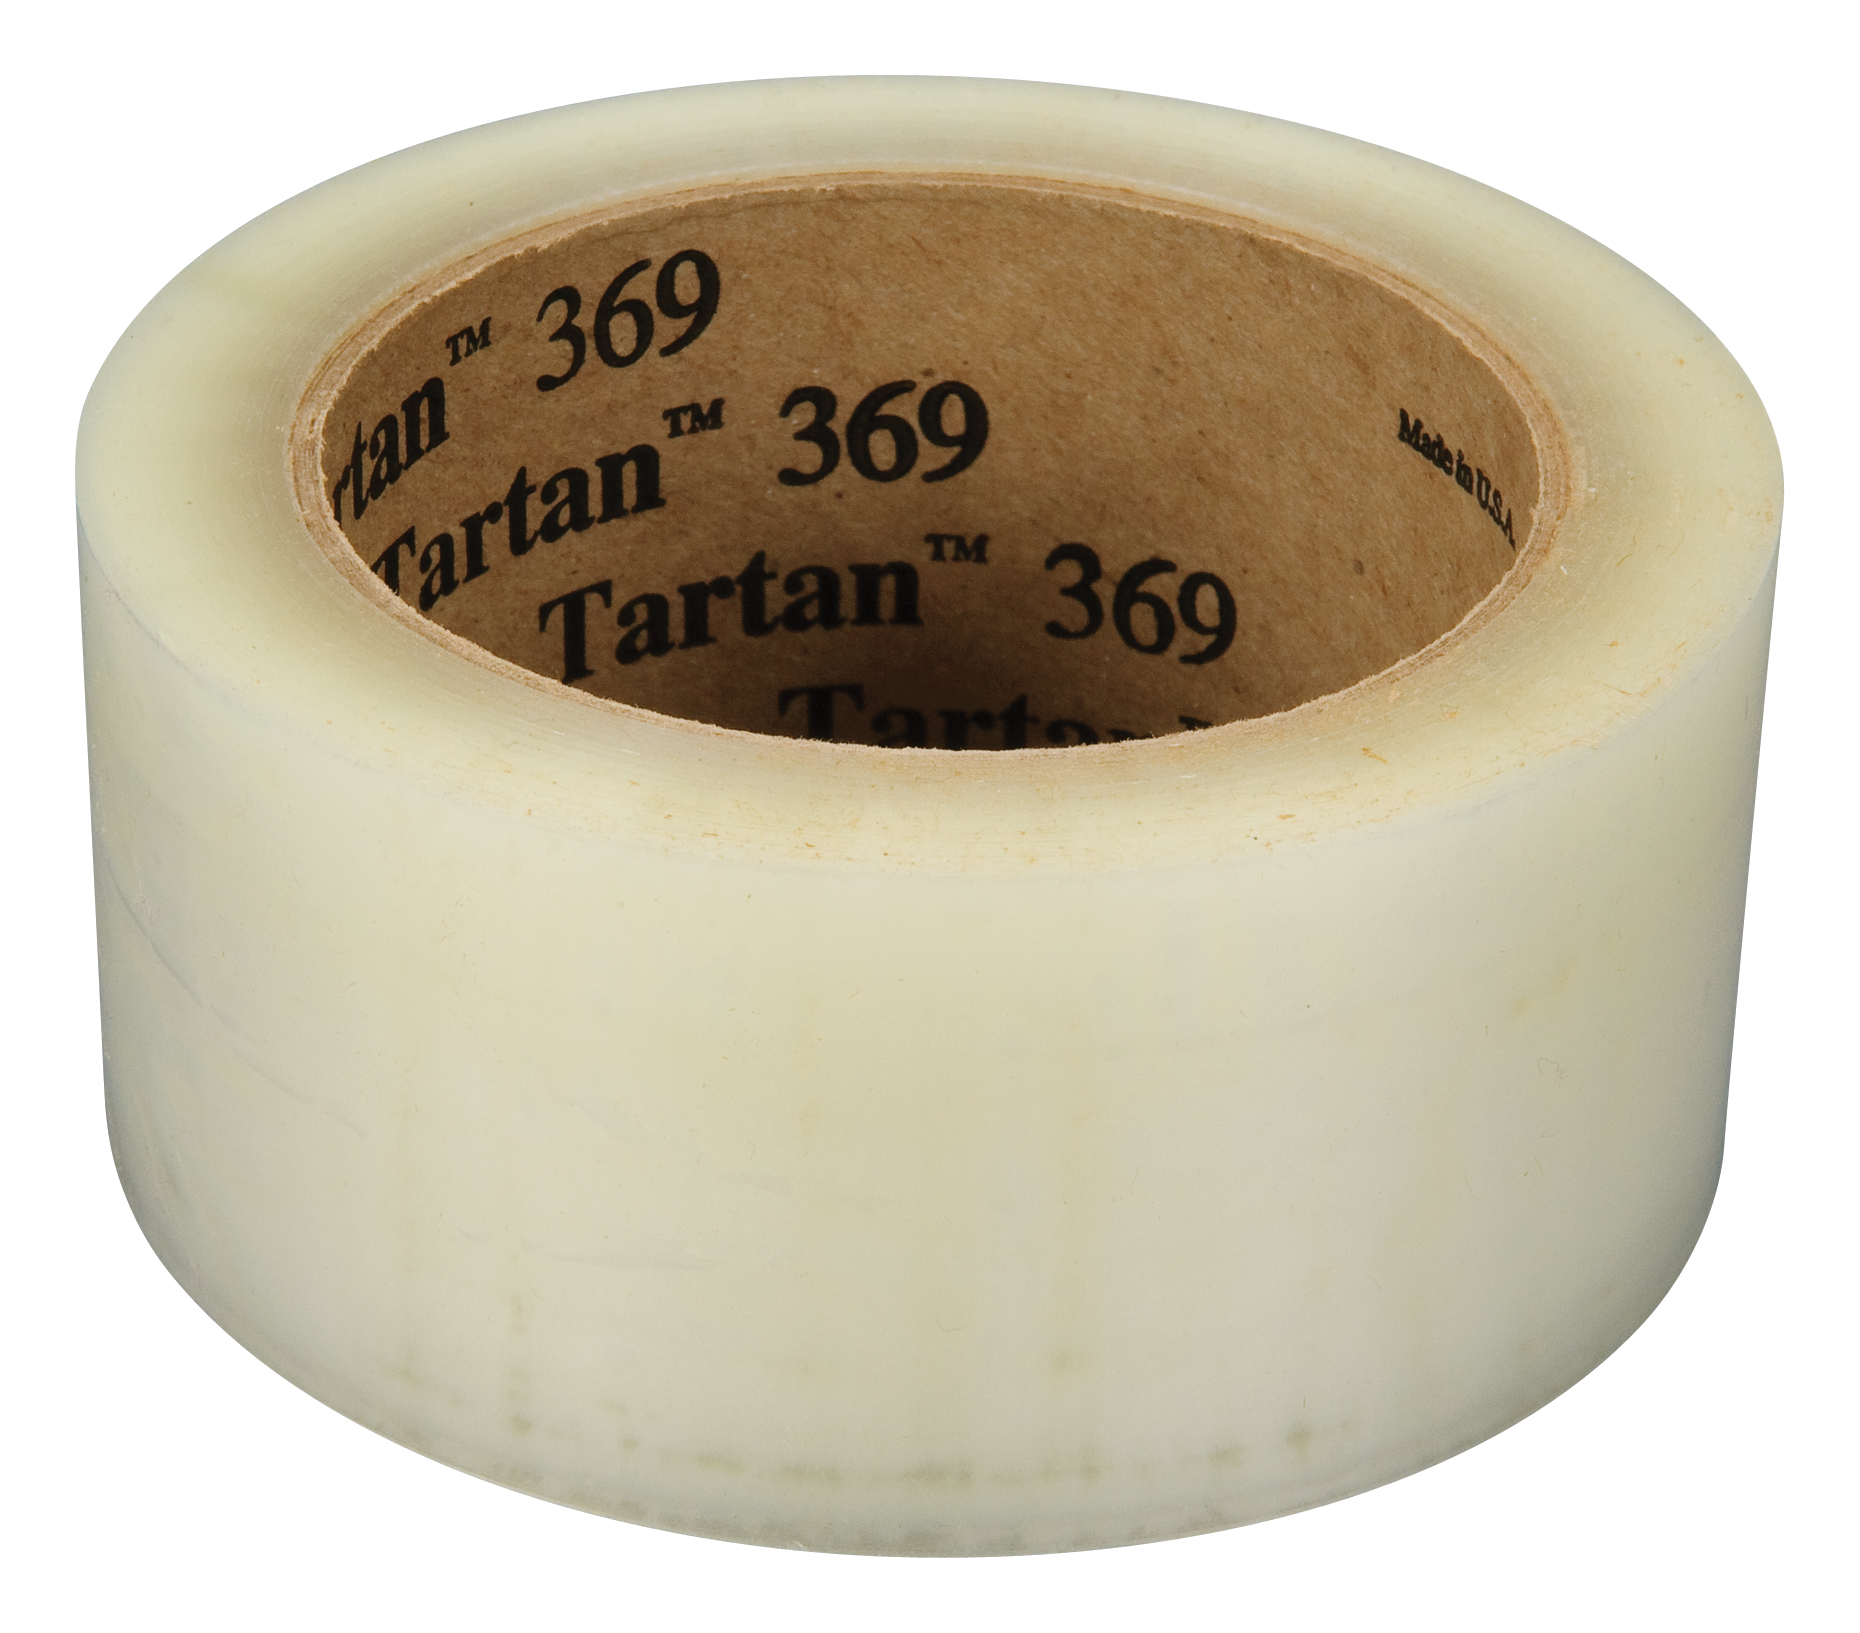 5 Star Clear Tape Roll Small Easy-tear Polypropylene 40 Microns 18mm x 33m PK 8 